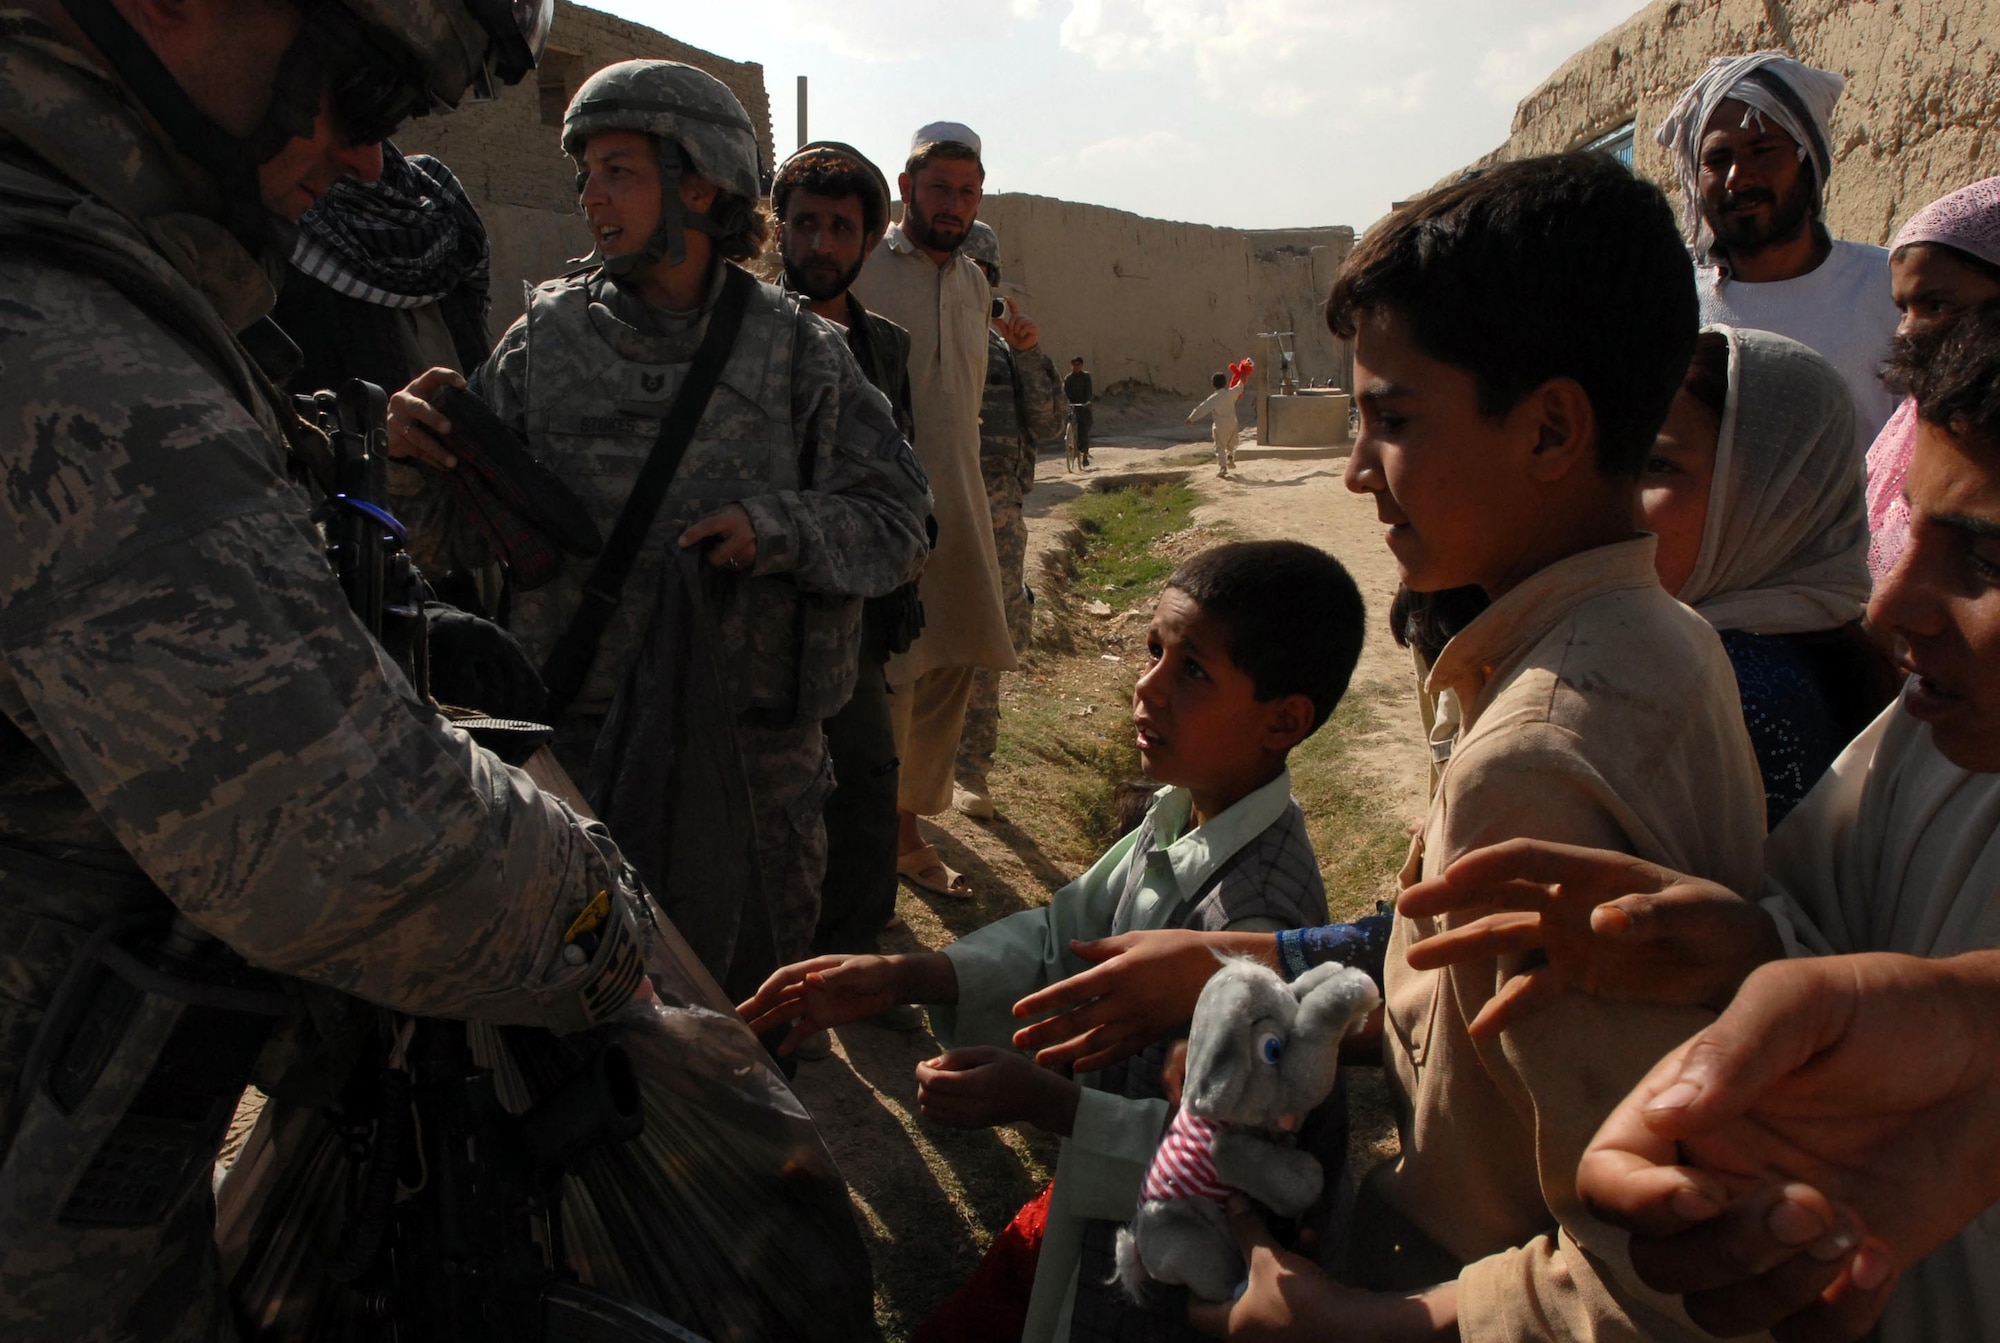 LOGAR PROVINCE, Afghanistan - Tech. Sgts. Michelle Stokes (center) and Brandon Livingstone (left), counter improvised explosive device team, out of Forward Operating Base Shank distribute school supplies, toys and shoes to children in the village of Polerad. (U.S. Army photo/Pfc. Melissa Stewart)